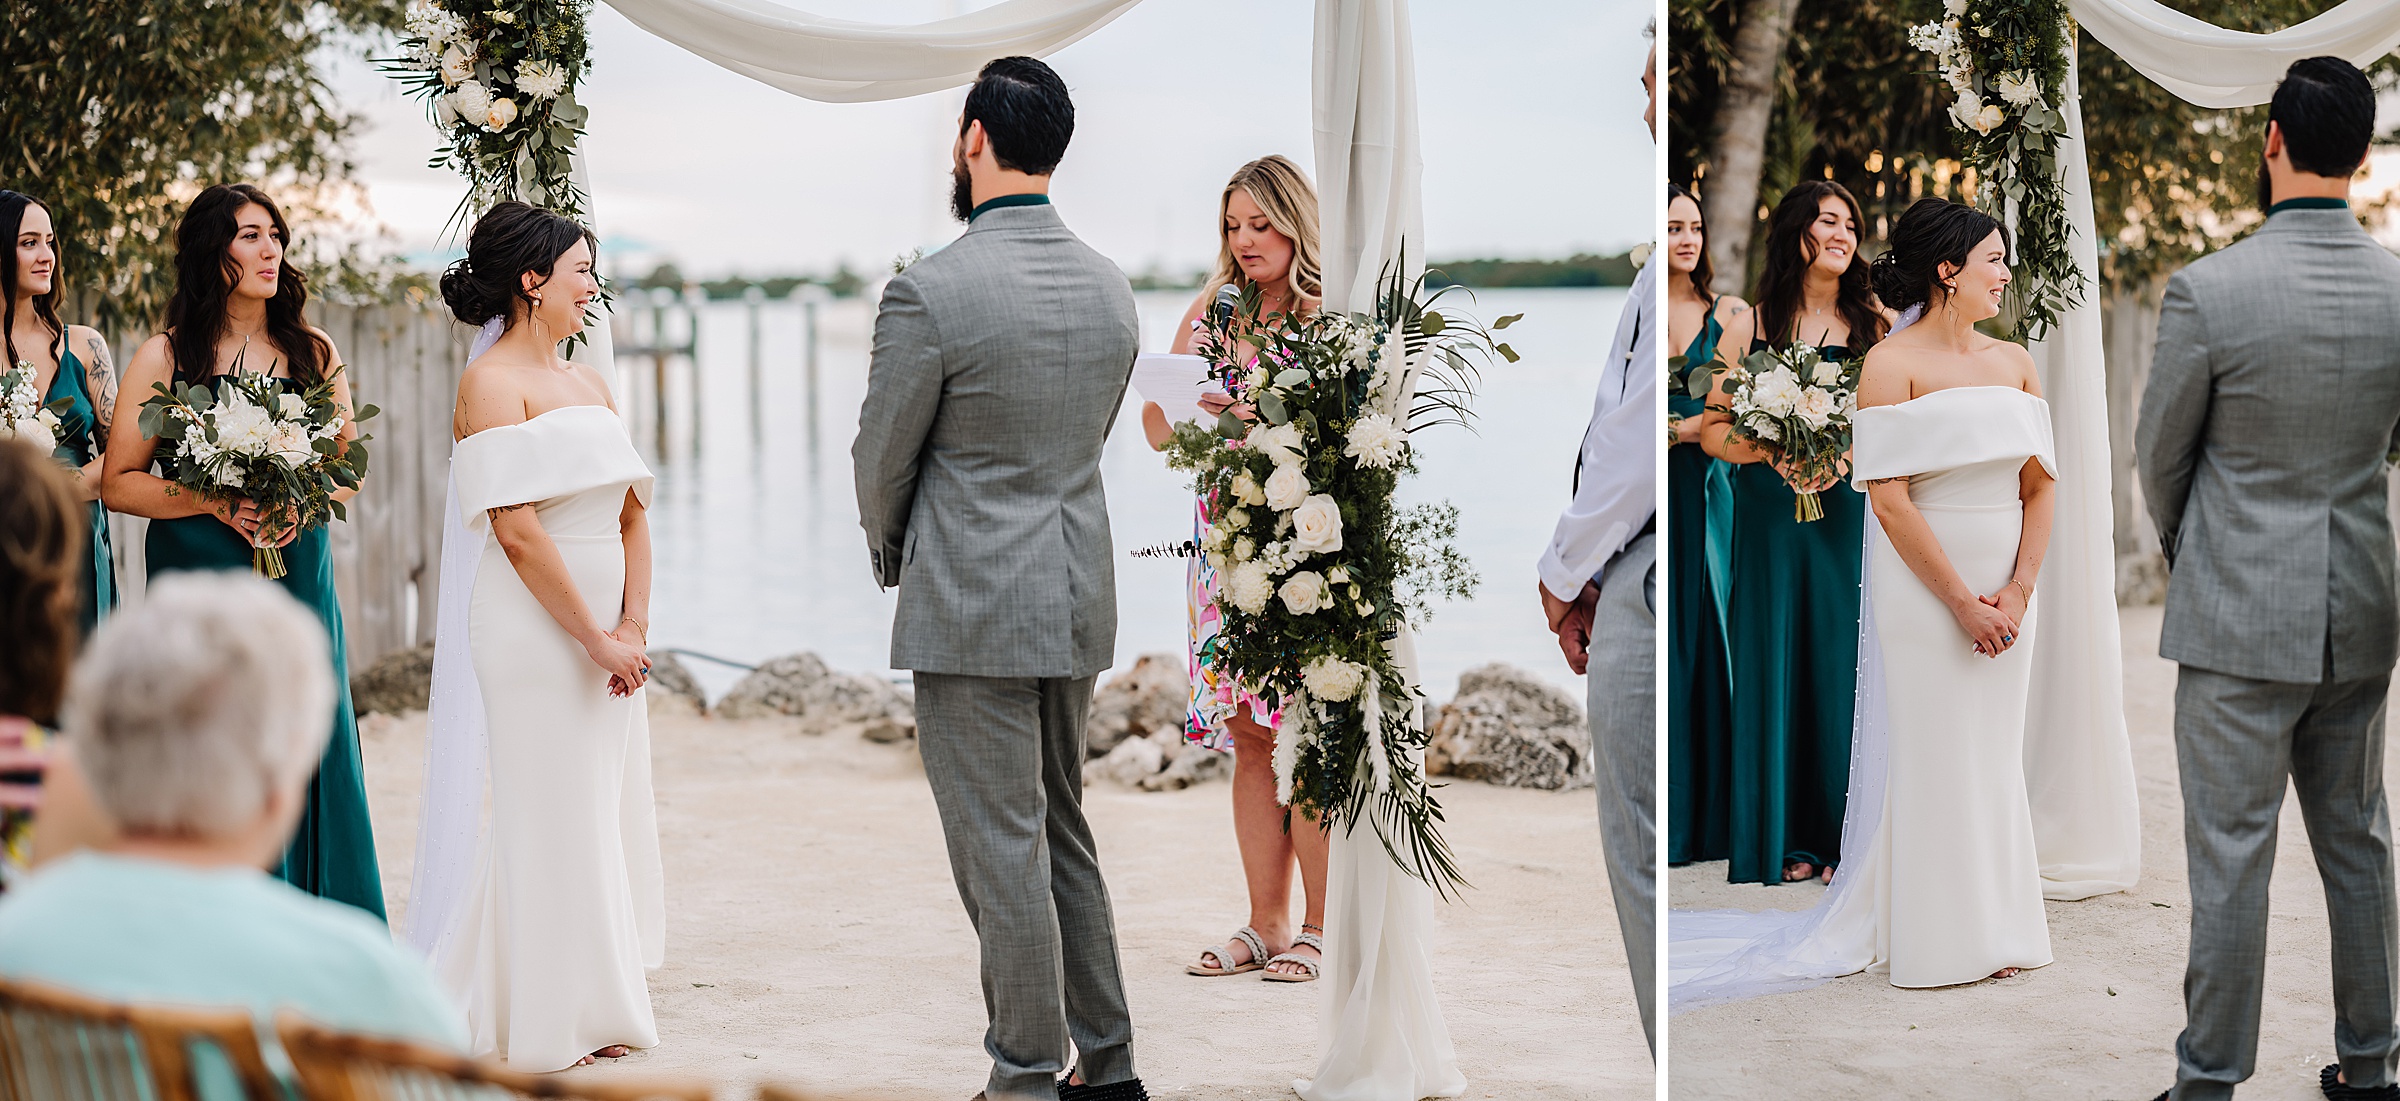 Sunset vows at a beach wedding ceremony in Key Largo, Florida.